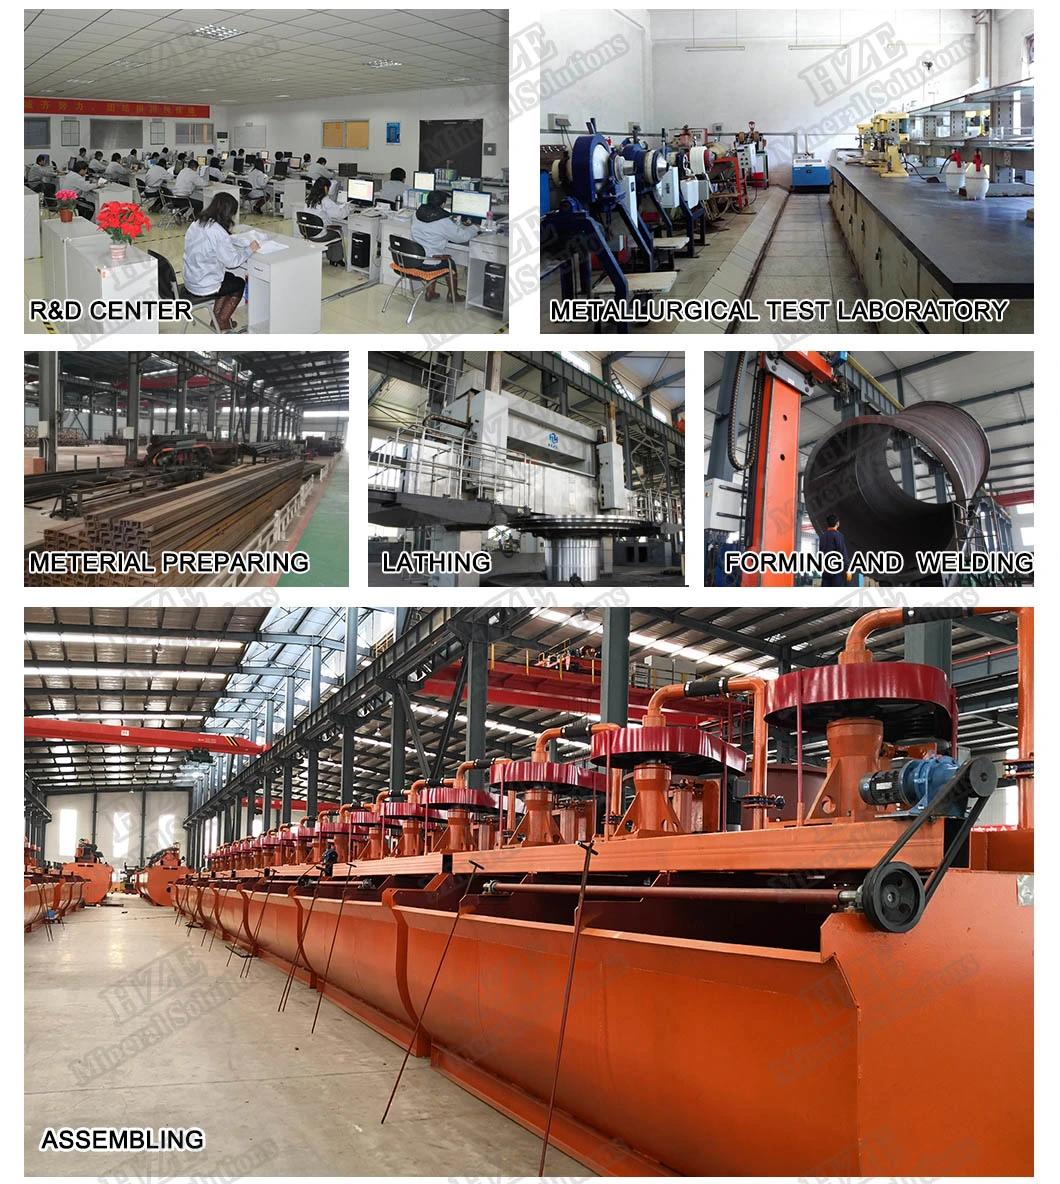 Iron Ore Processing Preconcentration Wet Drum Permanent Magnetic Separator for Thickening